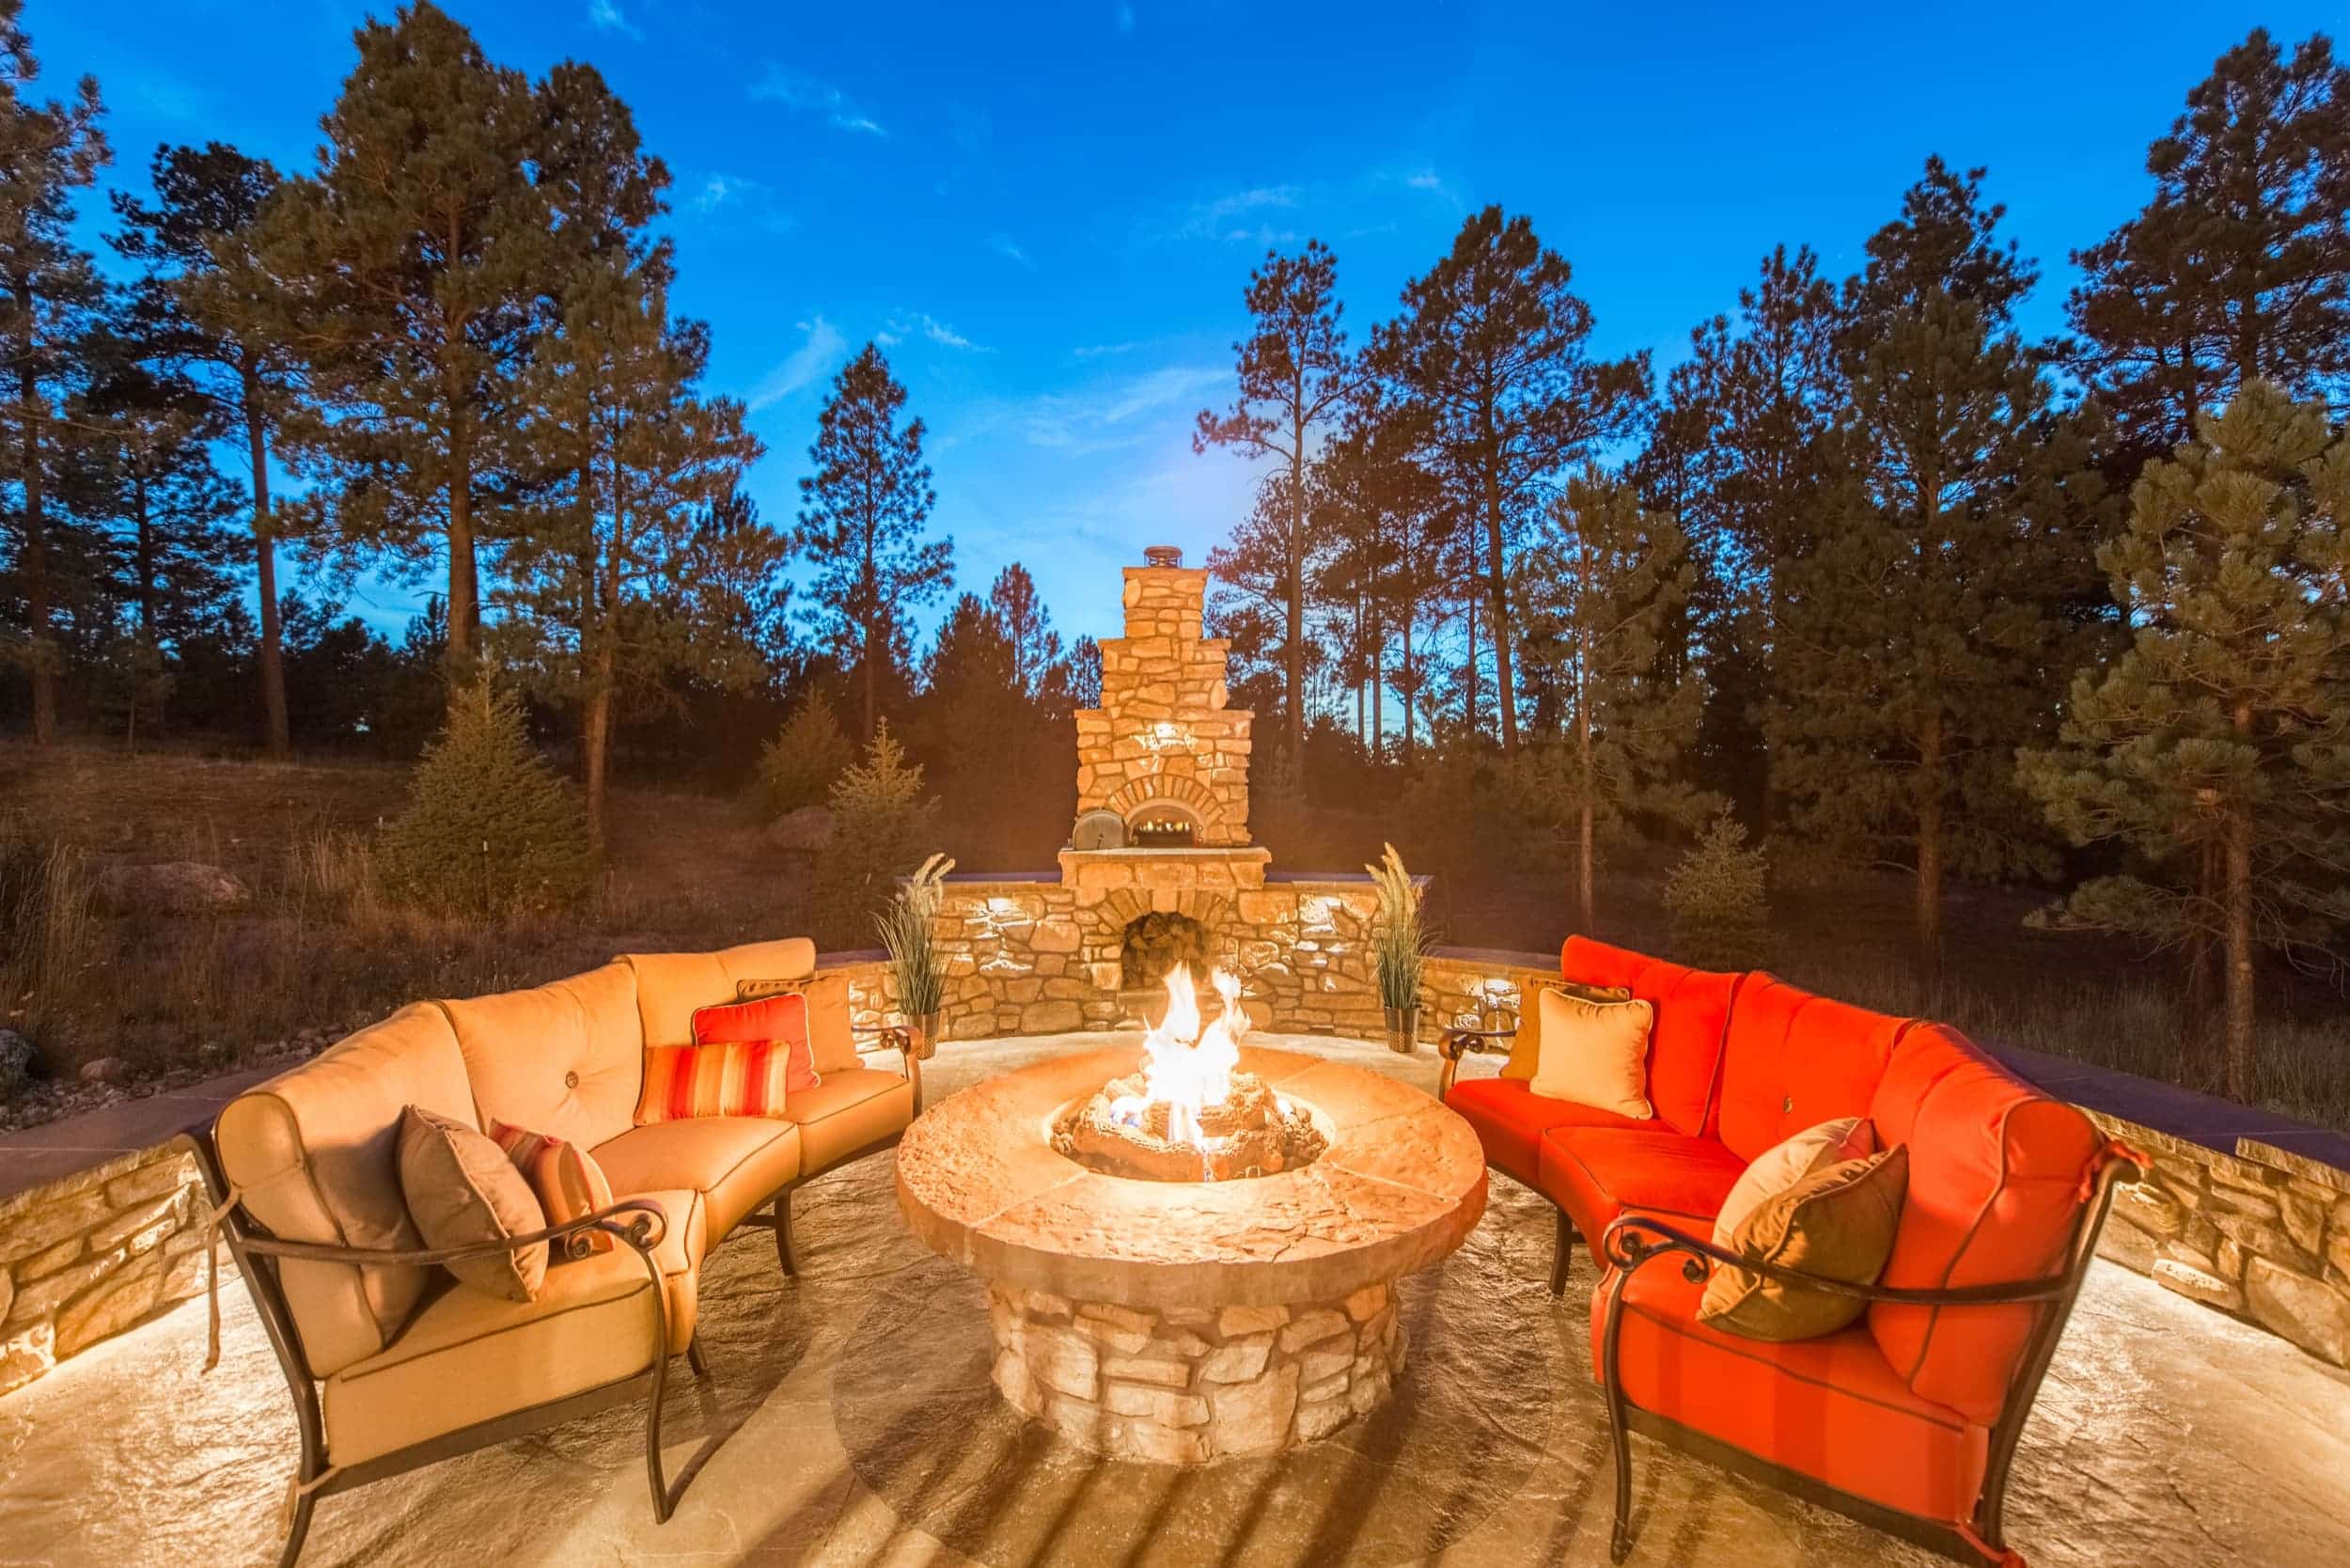 A fire pit in the middle of a patio at dusk.